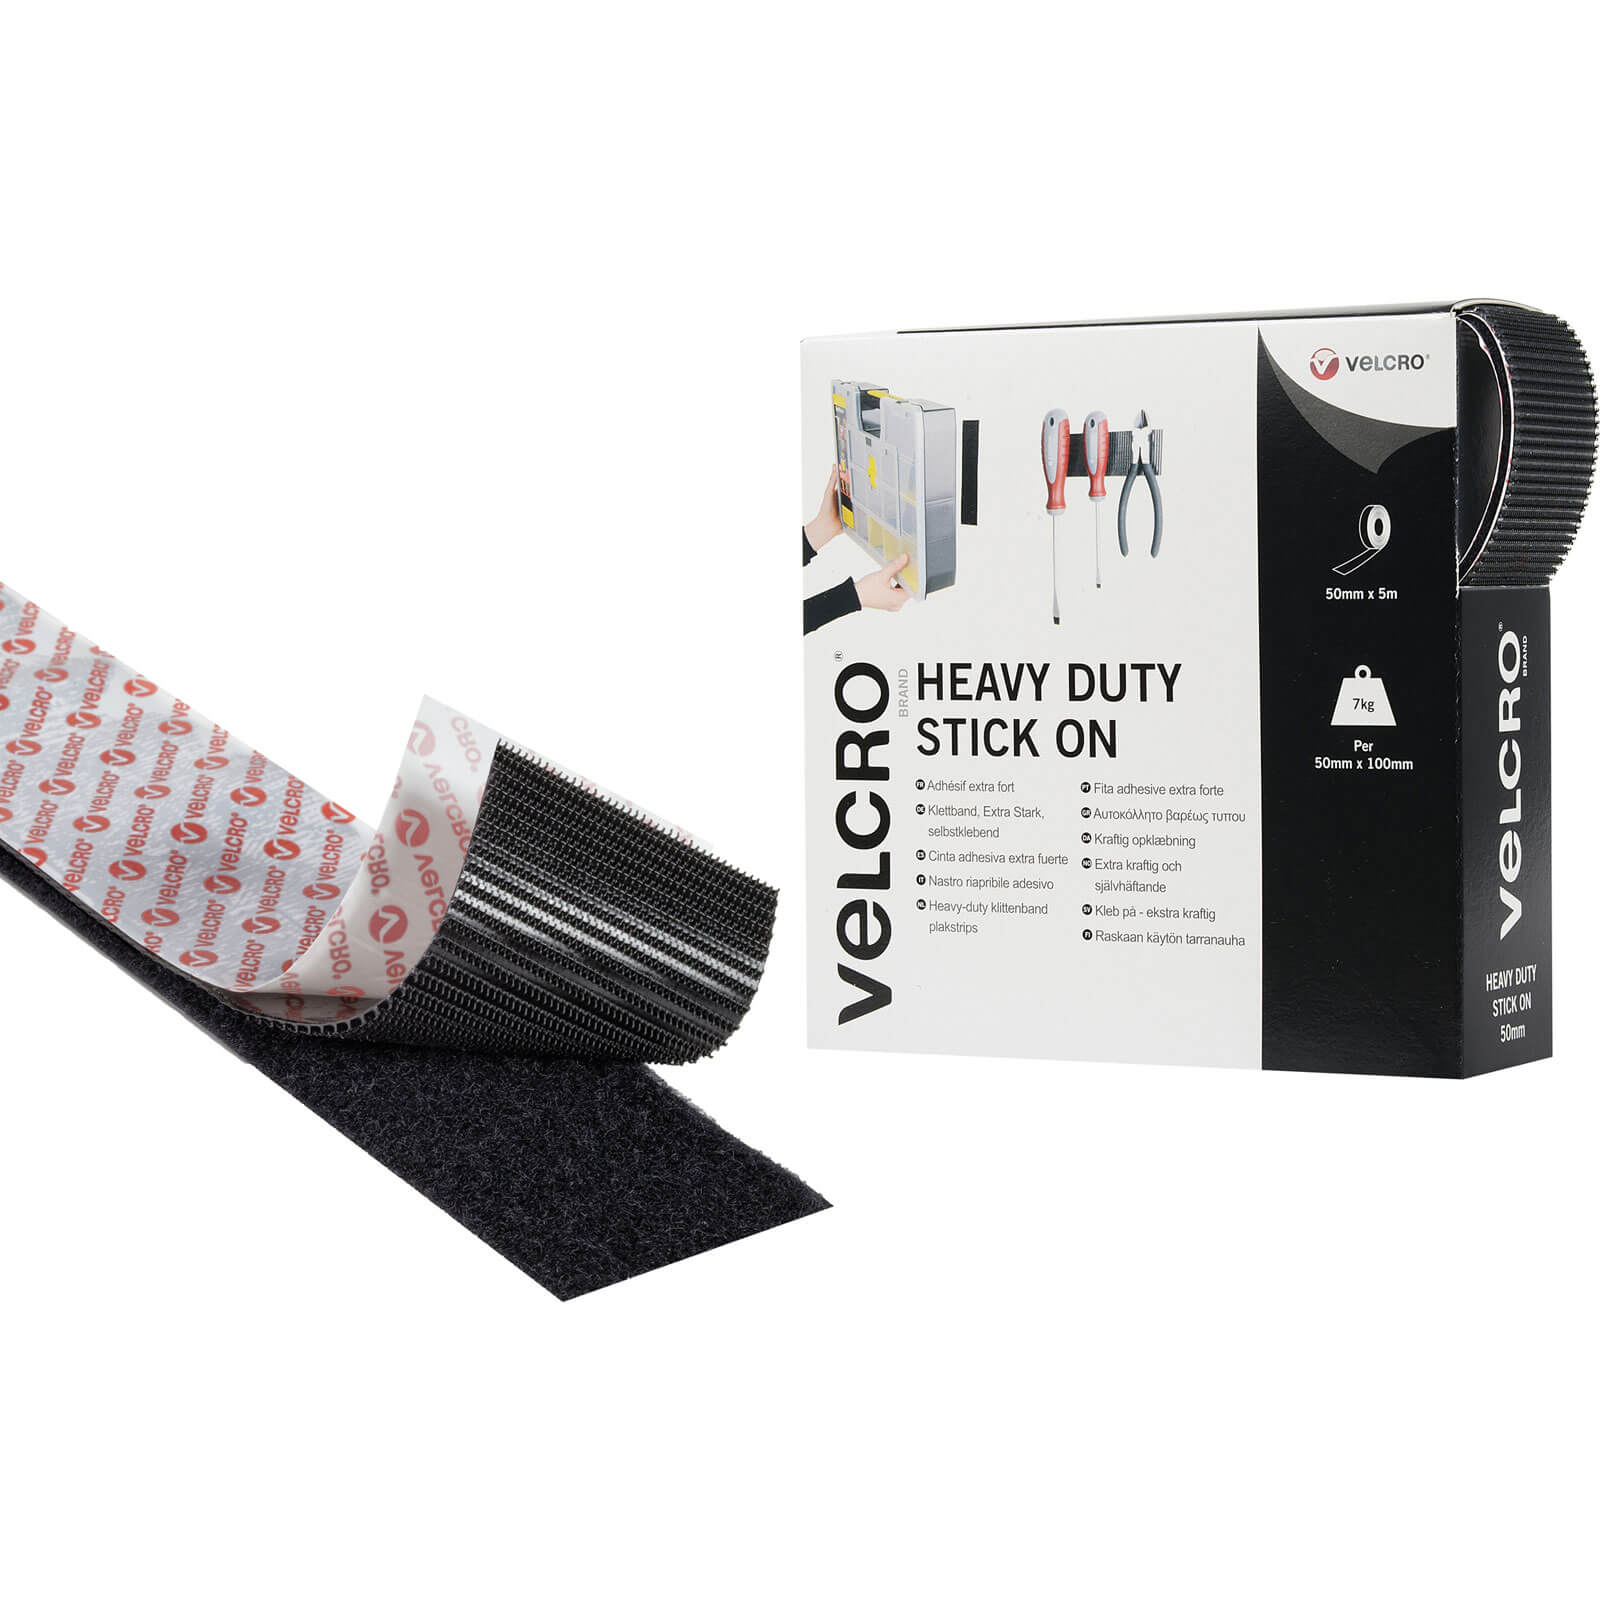 Photo of Velcro Heavy Duty Stick On Tape Black 50mm 5m Pack Of 1